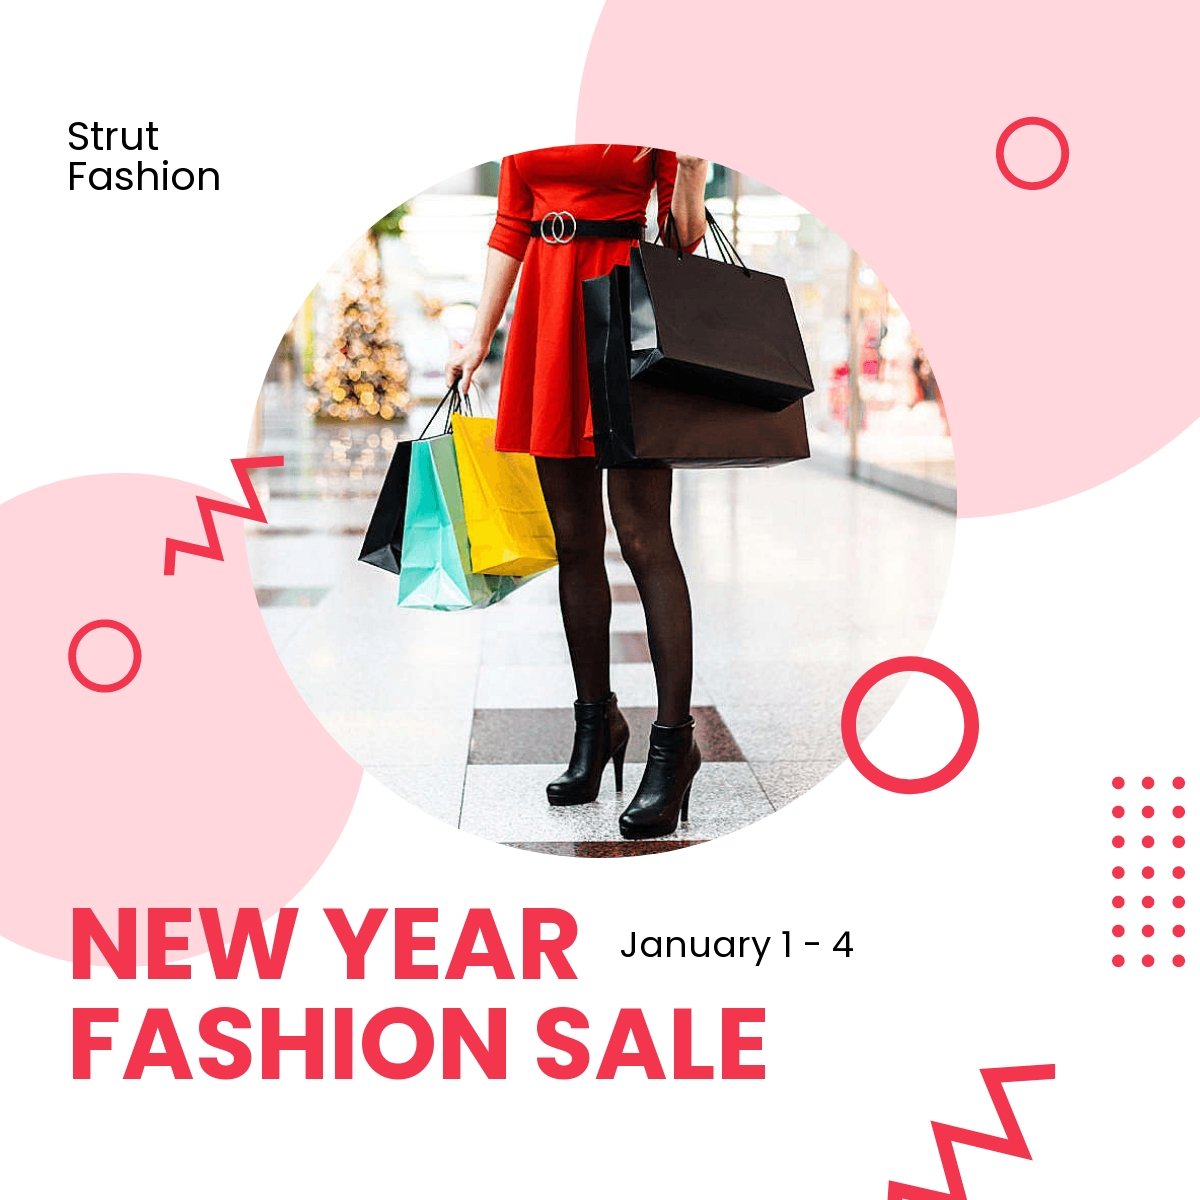 Free New Year Fashion Sale Promotion Linkedin Post Template